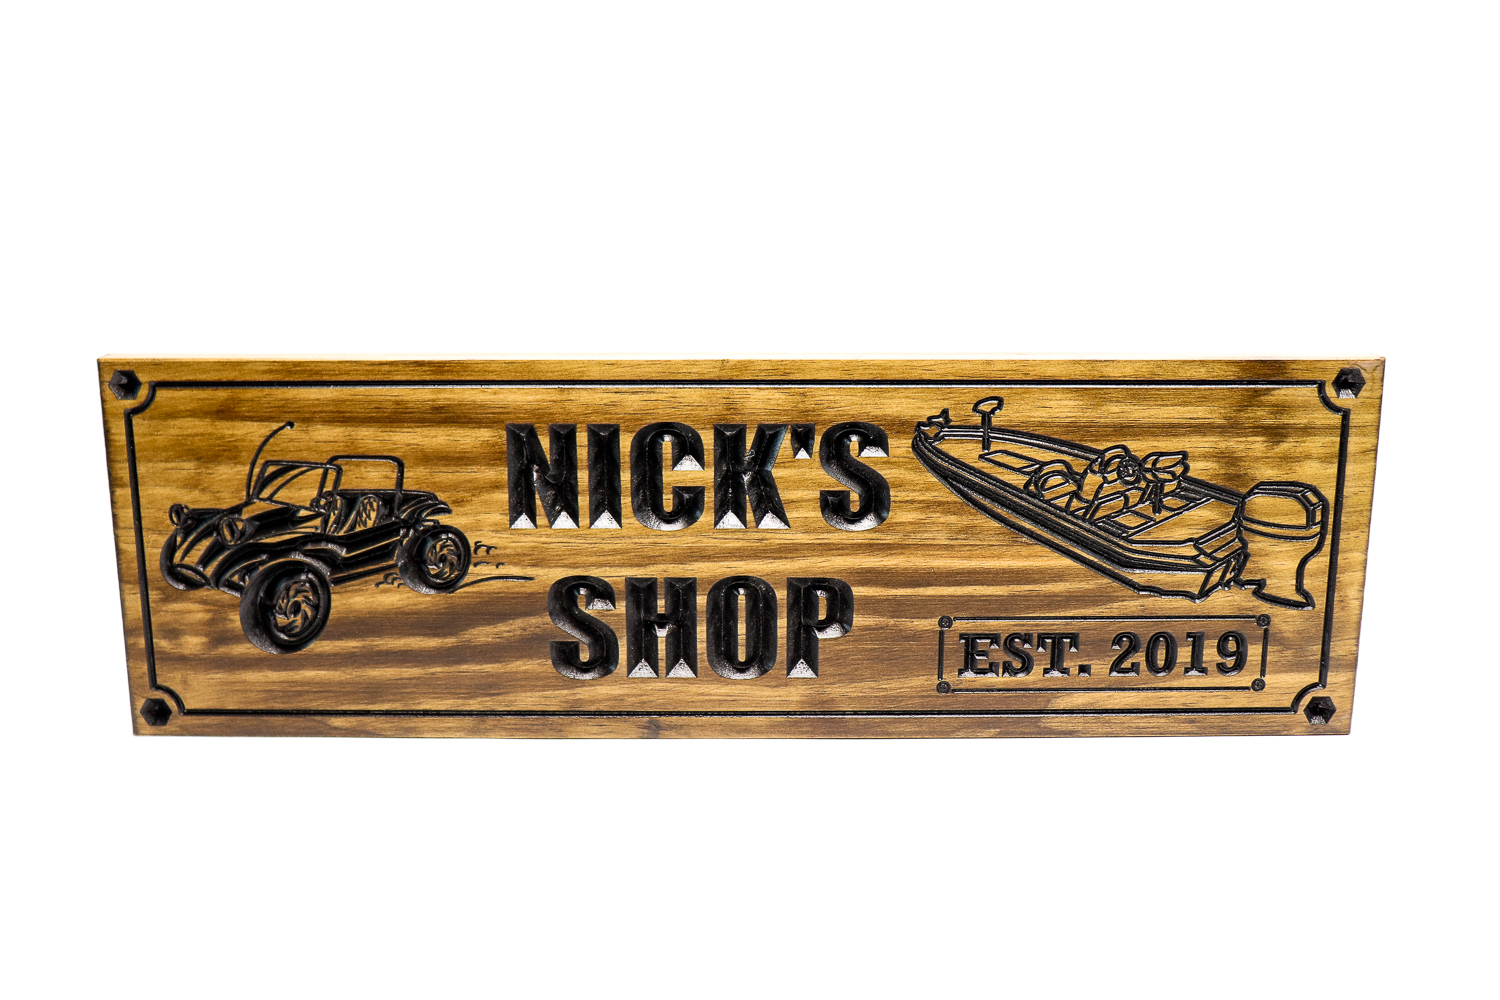 Bass boat and Dune buggy shop sign